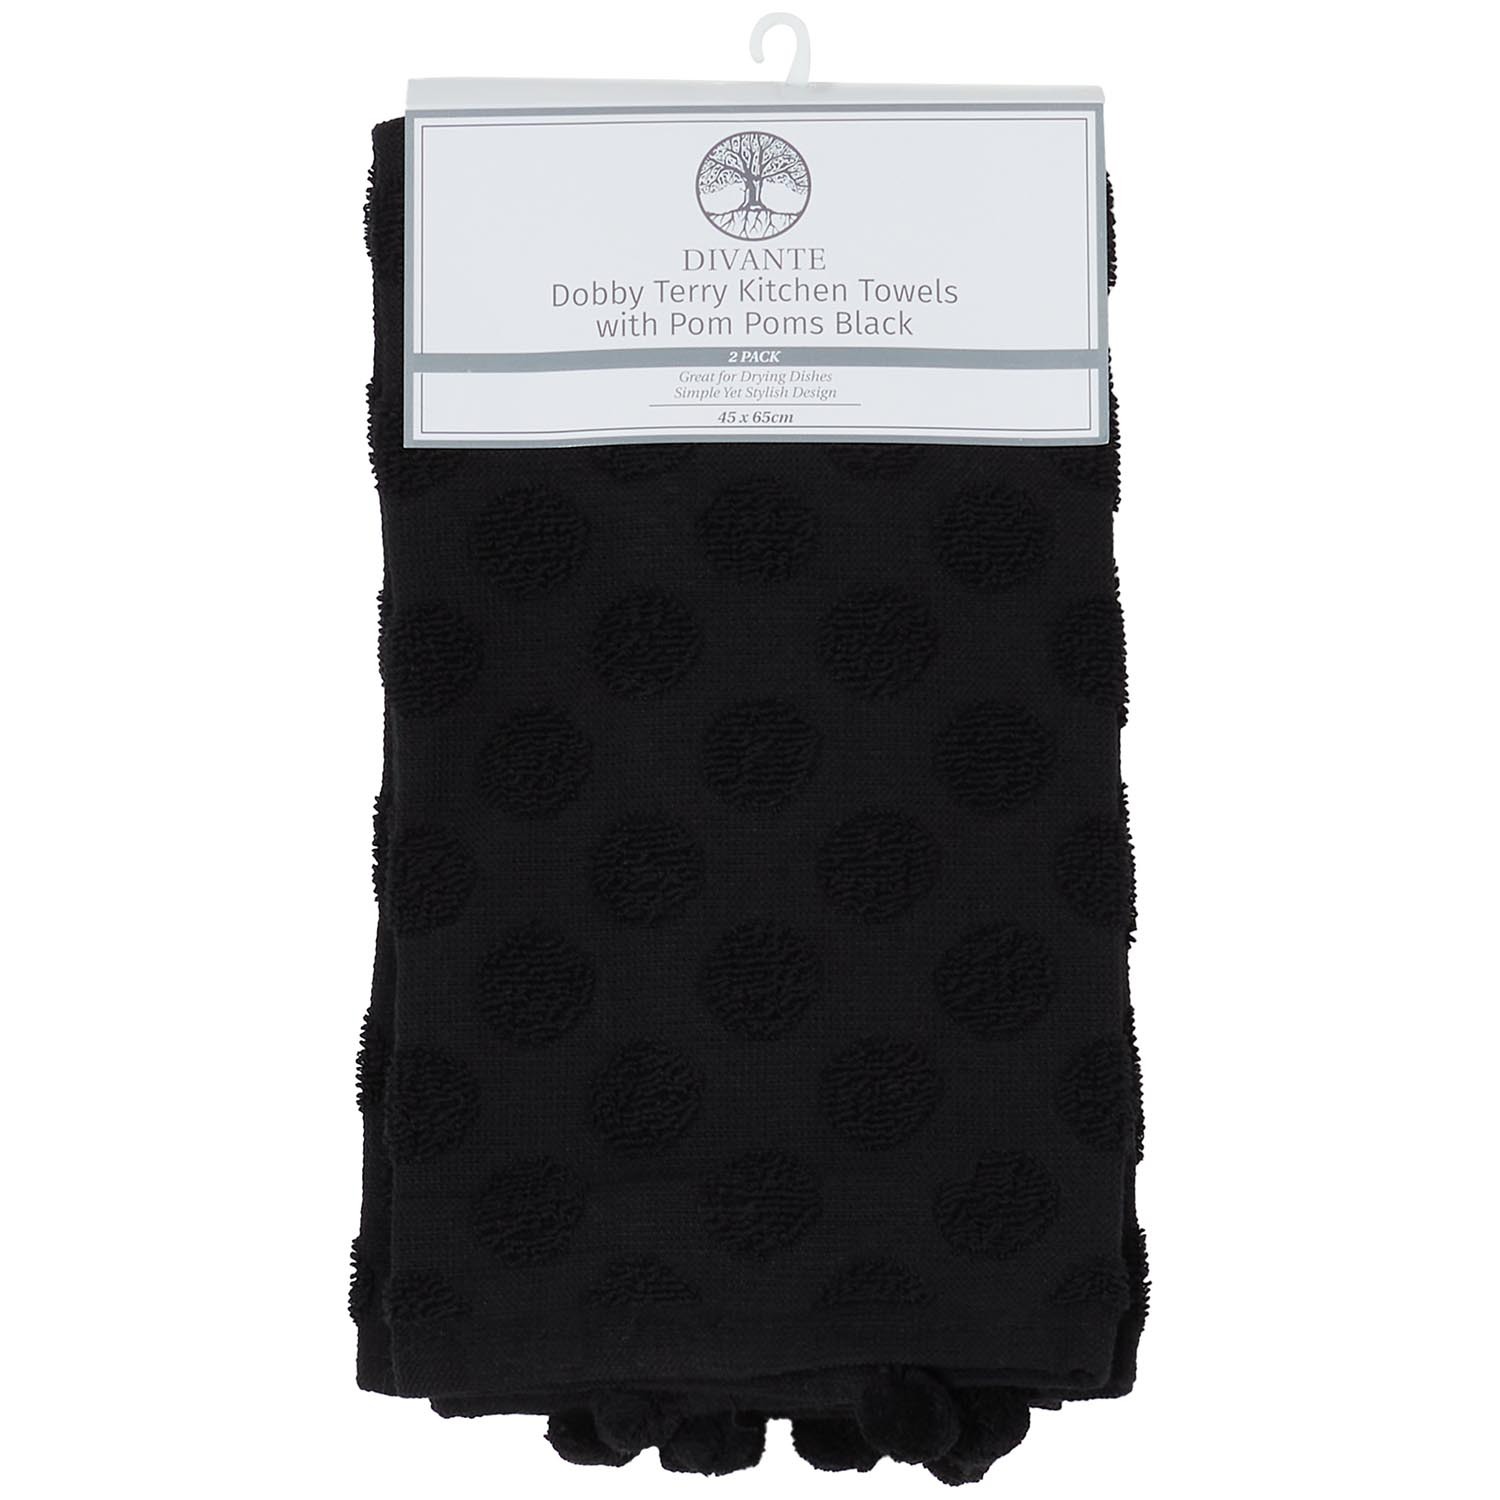 Pack of 2 Dobby Terry Kitchen Towels with Pom Poms - Black Image 1